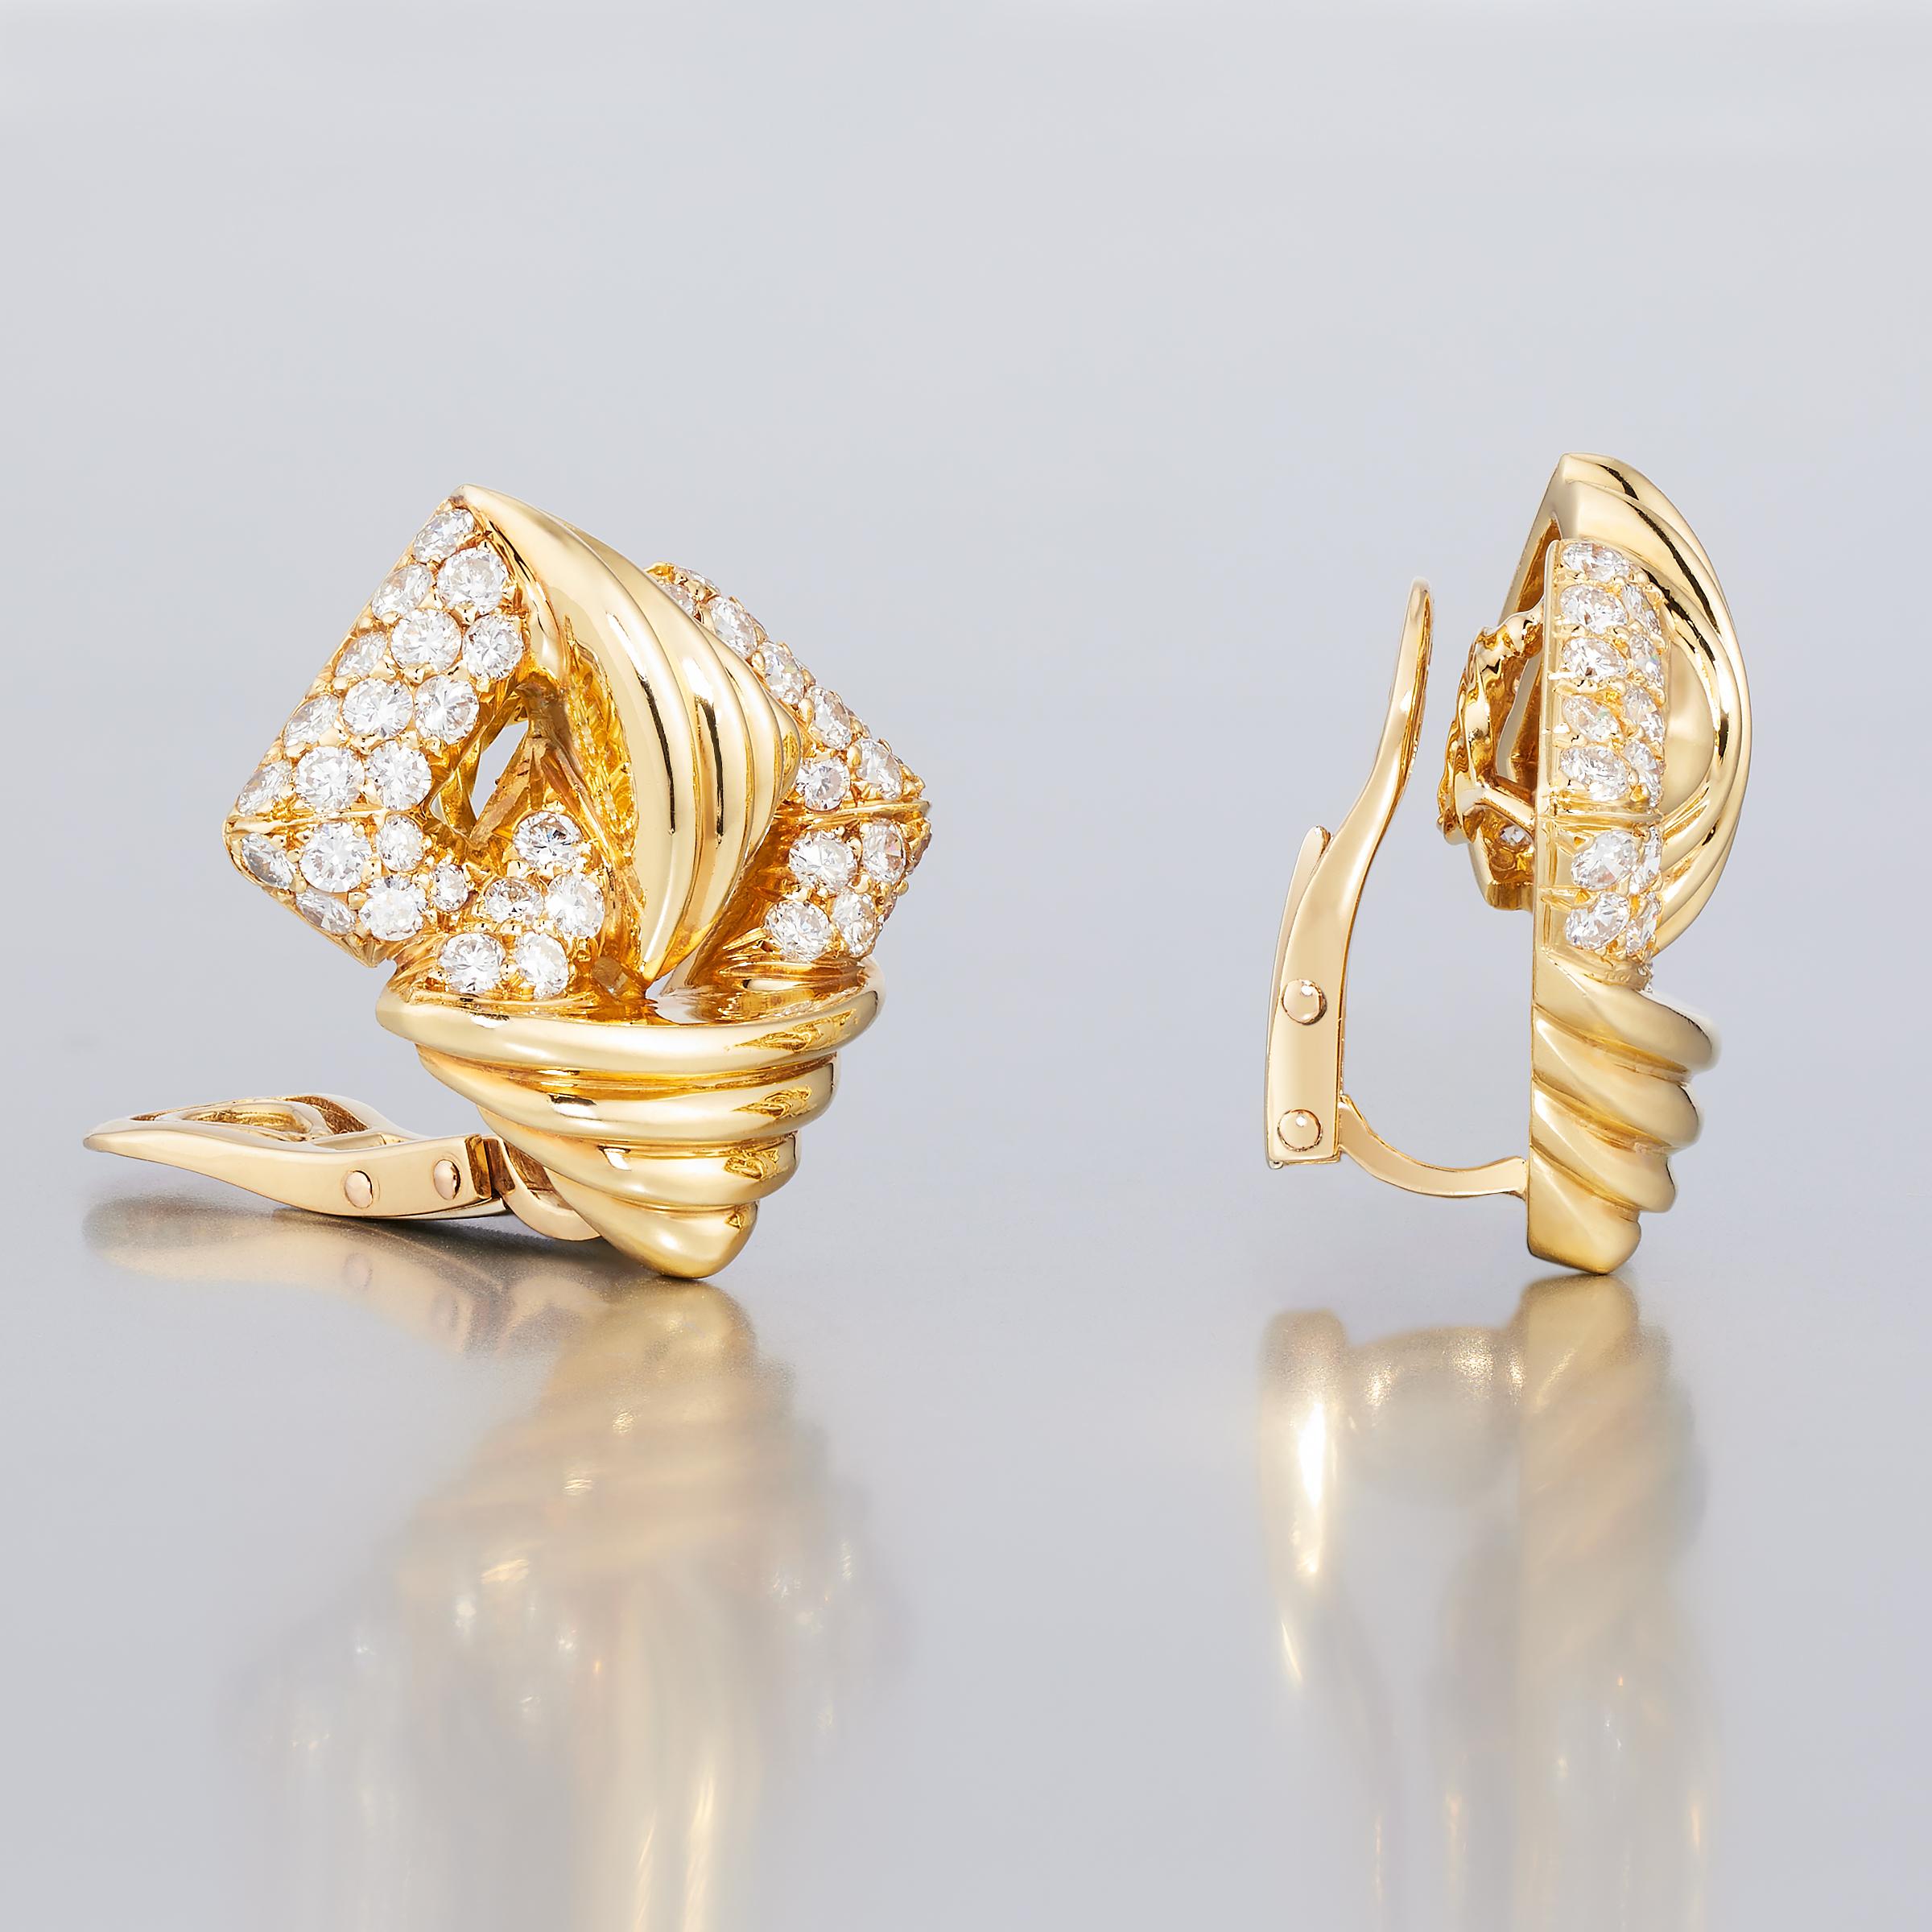 An enchanting pair of vintage Mauboussin Paris diamond earrings from 1980s. They showcase approximately 2.5 carats of sparkling diamonds of high color and clarity (F to G / VVS to VS) set in shimmering 18 karat yellow gold. The earrings feature